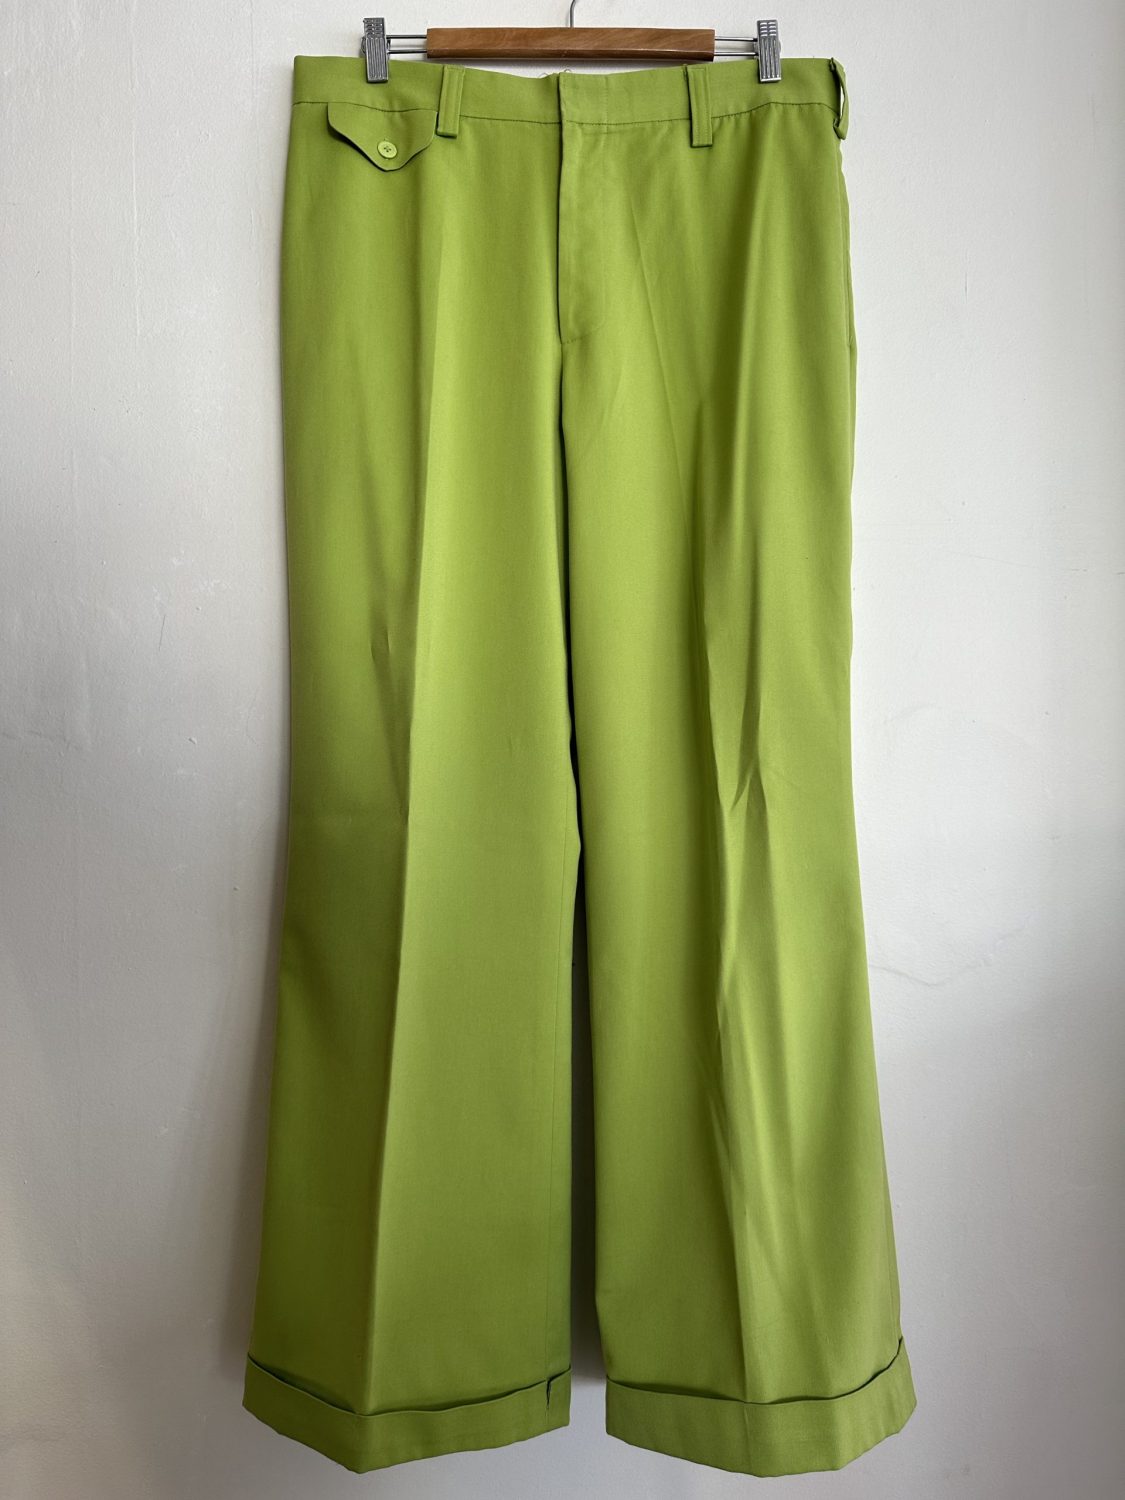 LIME GREEN TAILOR MADE 70S INSPIRED 2PC MENS SUIT | Chaos Bazaar Vintage